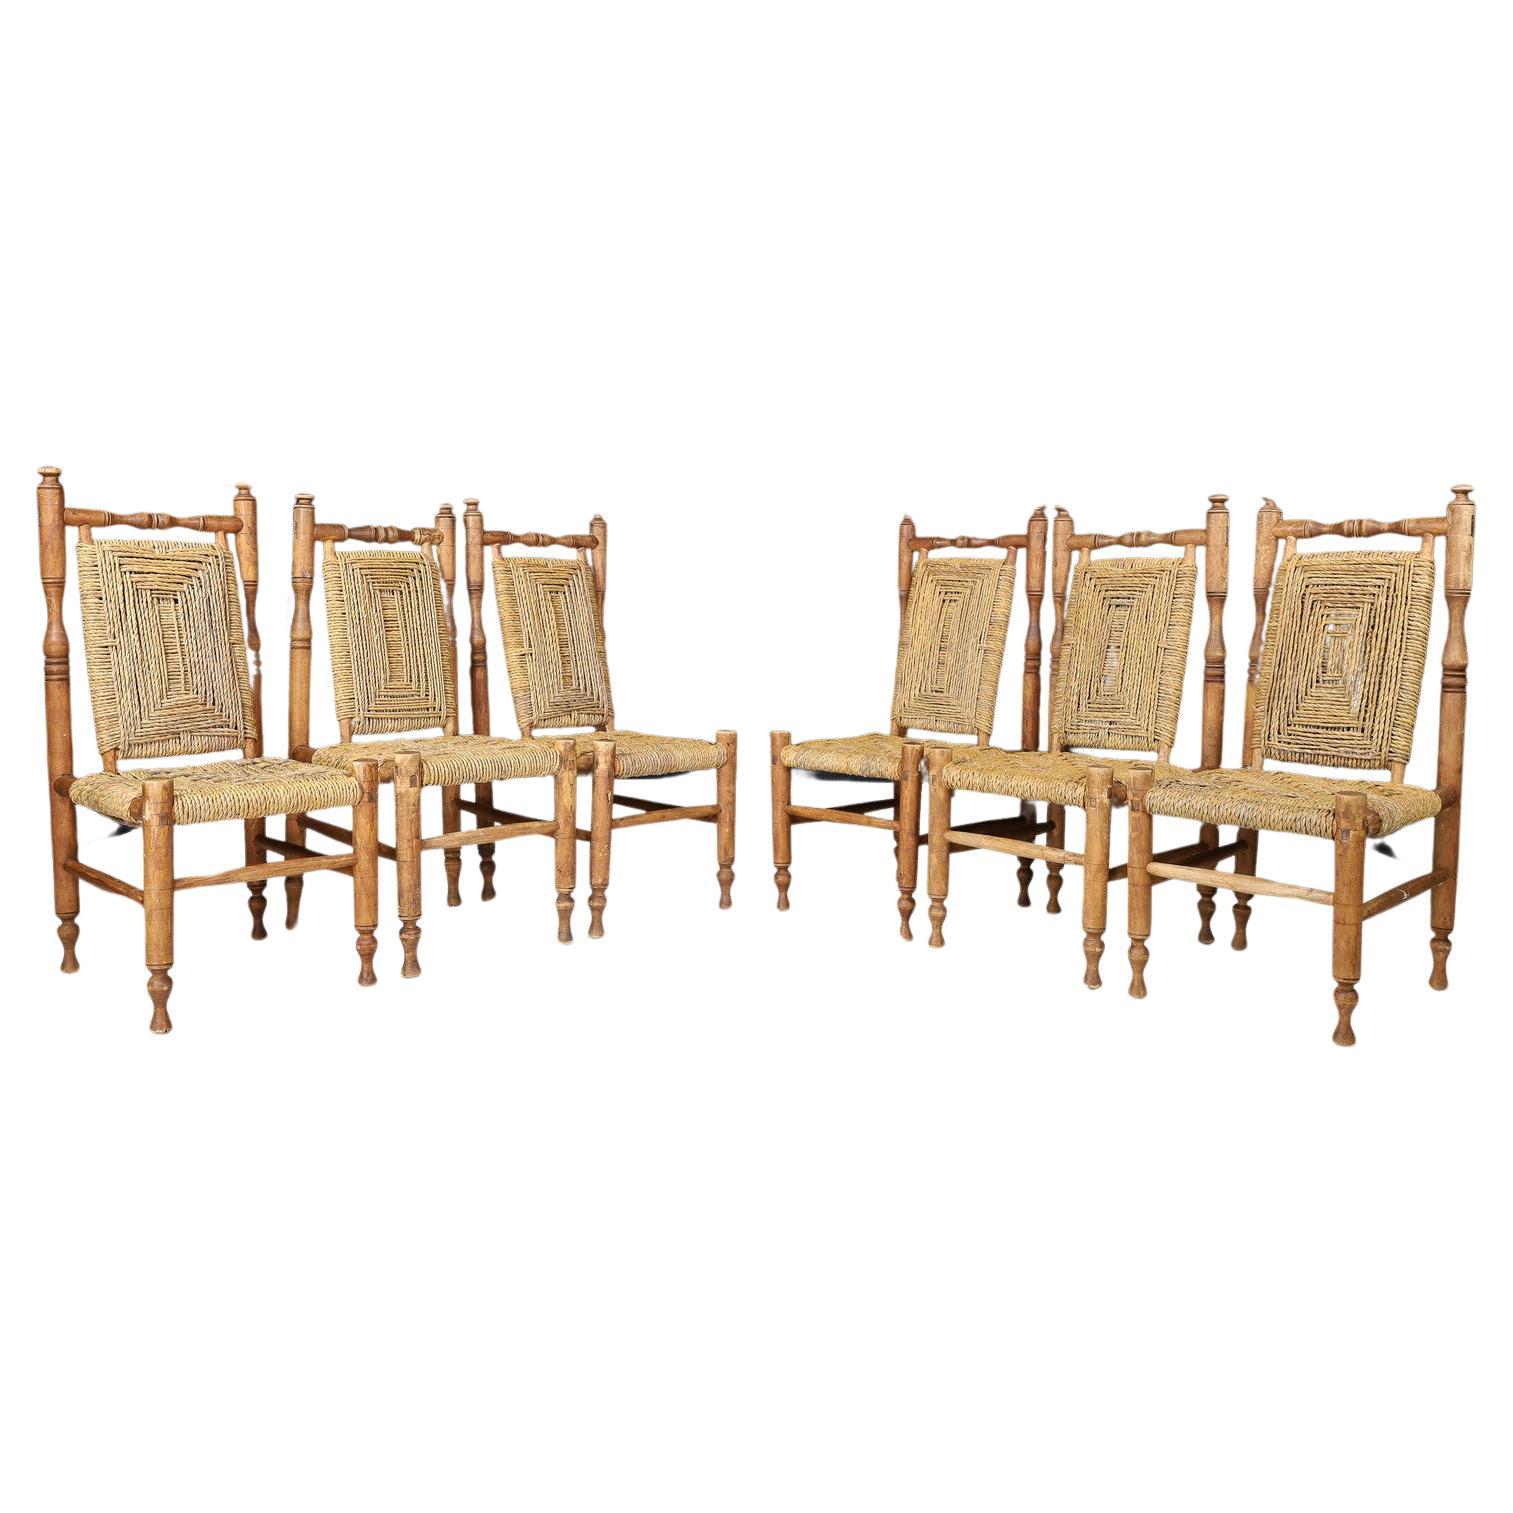 Rope Adrien Audoux and Frida Minet, Set of 8 Mid Century Dining Chairs, circa 1950s For Sale